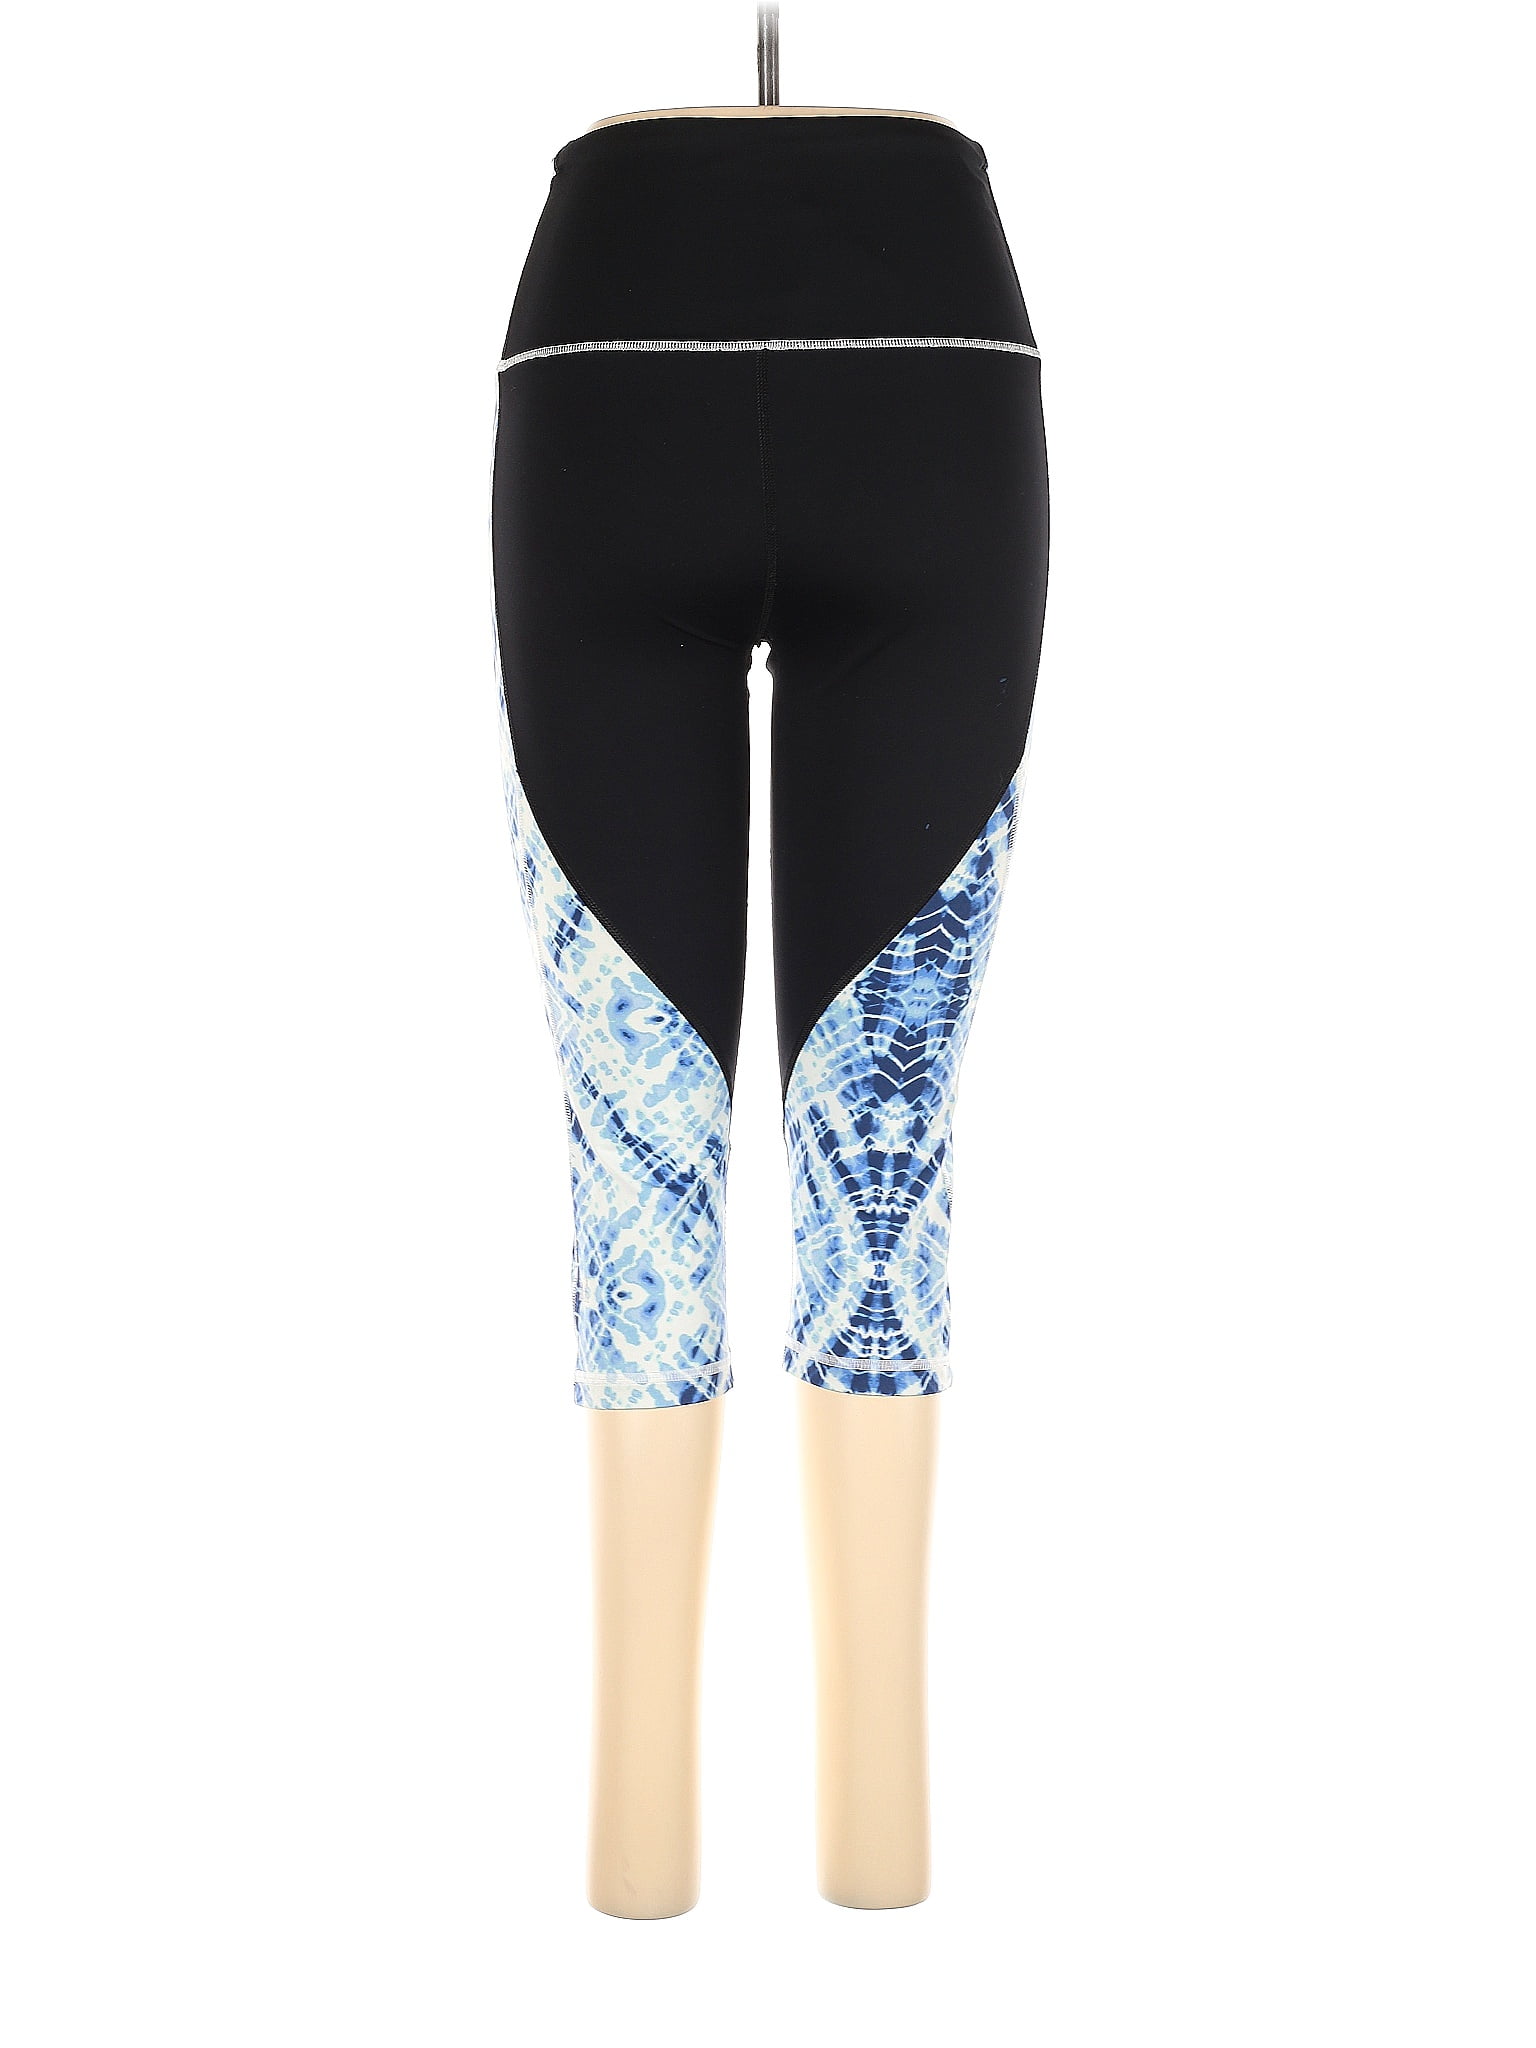 MPG Sport Andrea High Waisted Coated Legging in Teal Green 2X - 3X